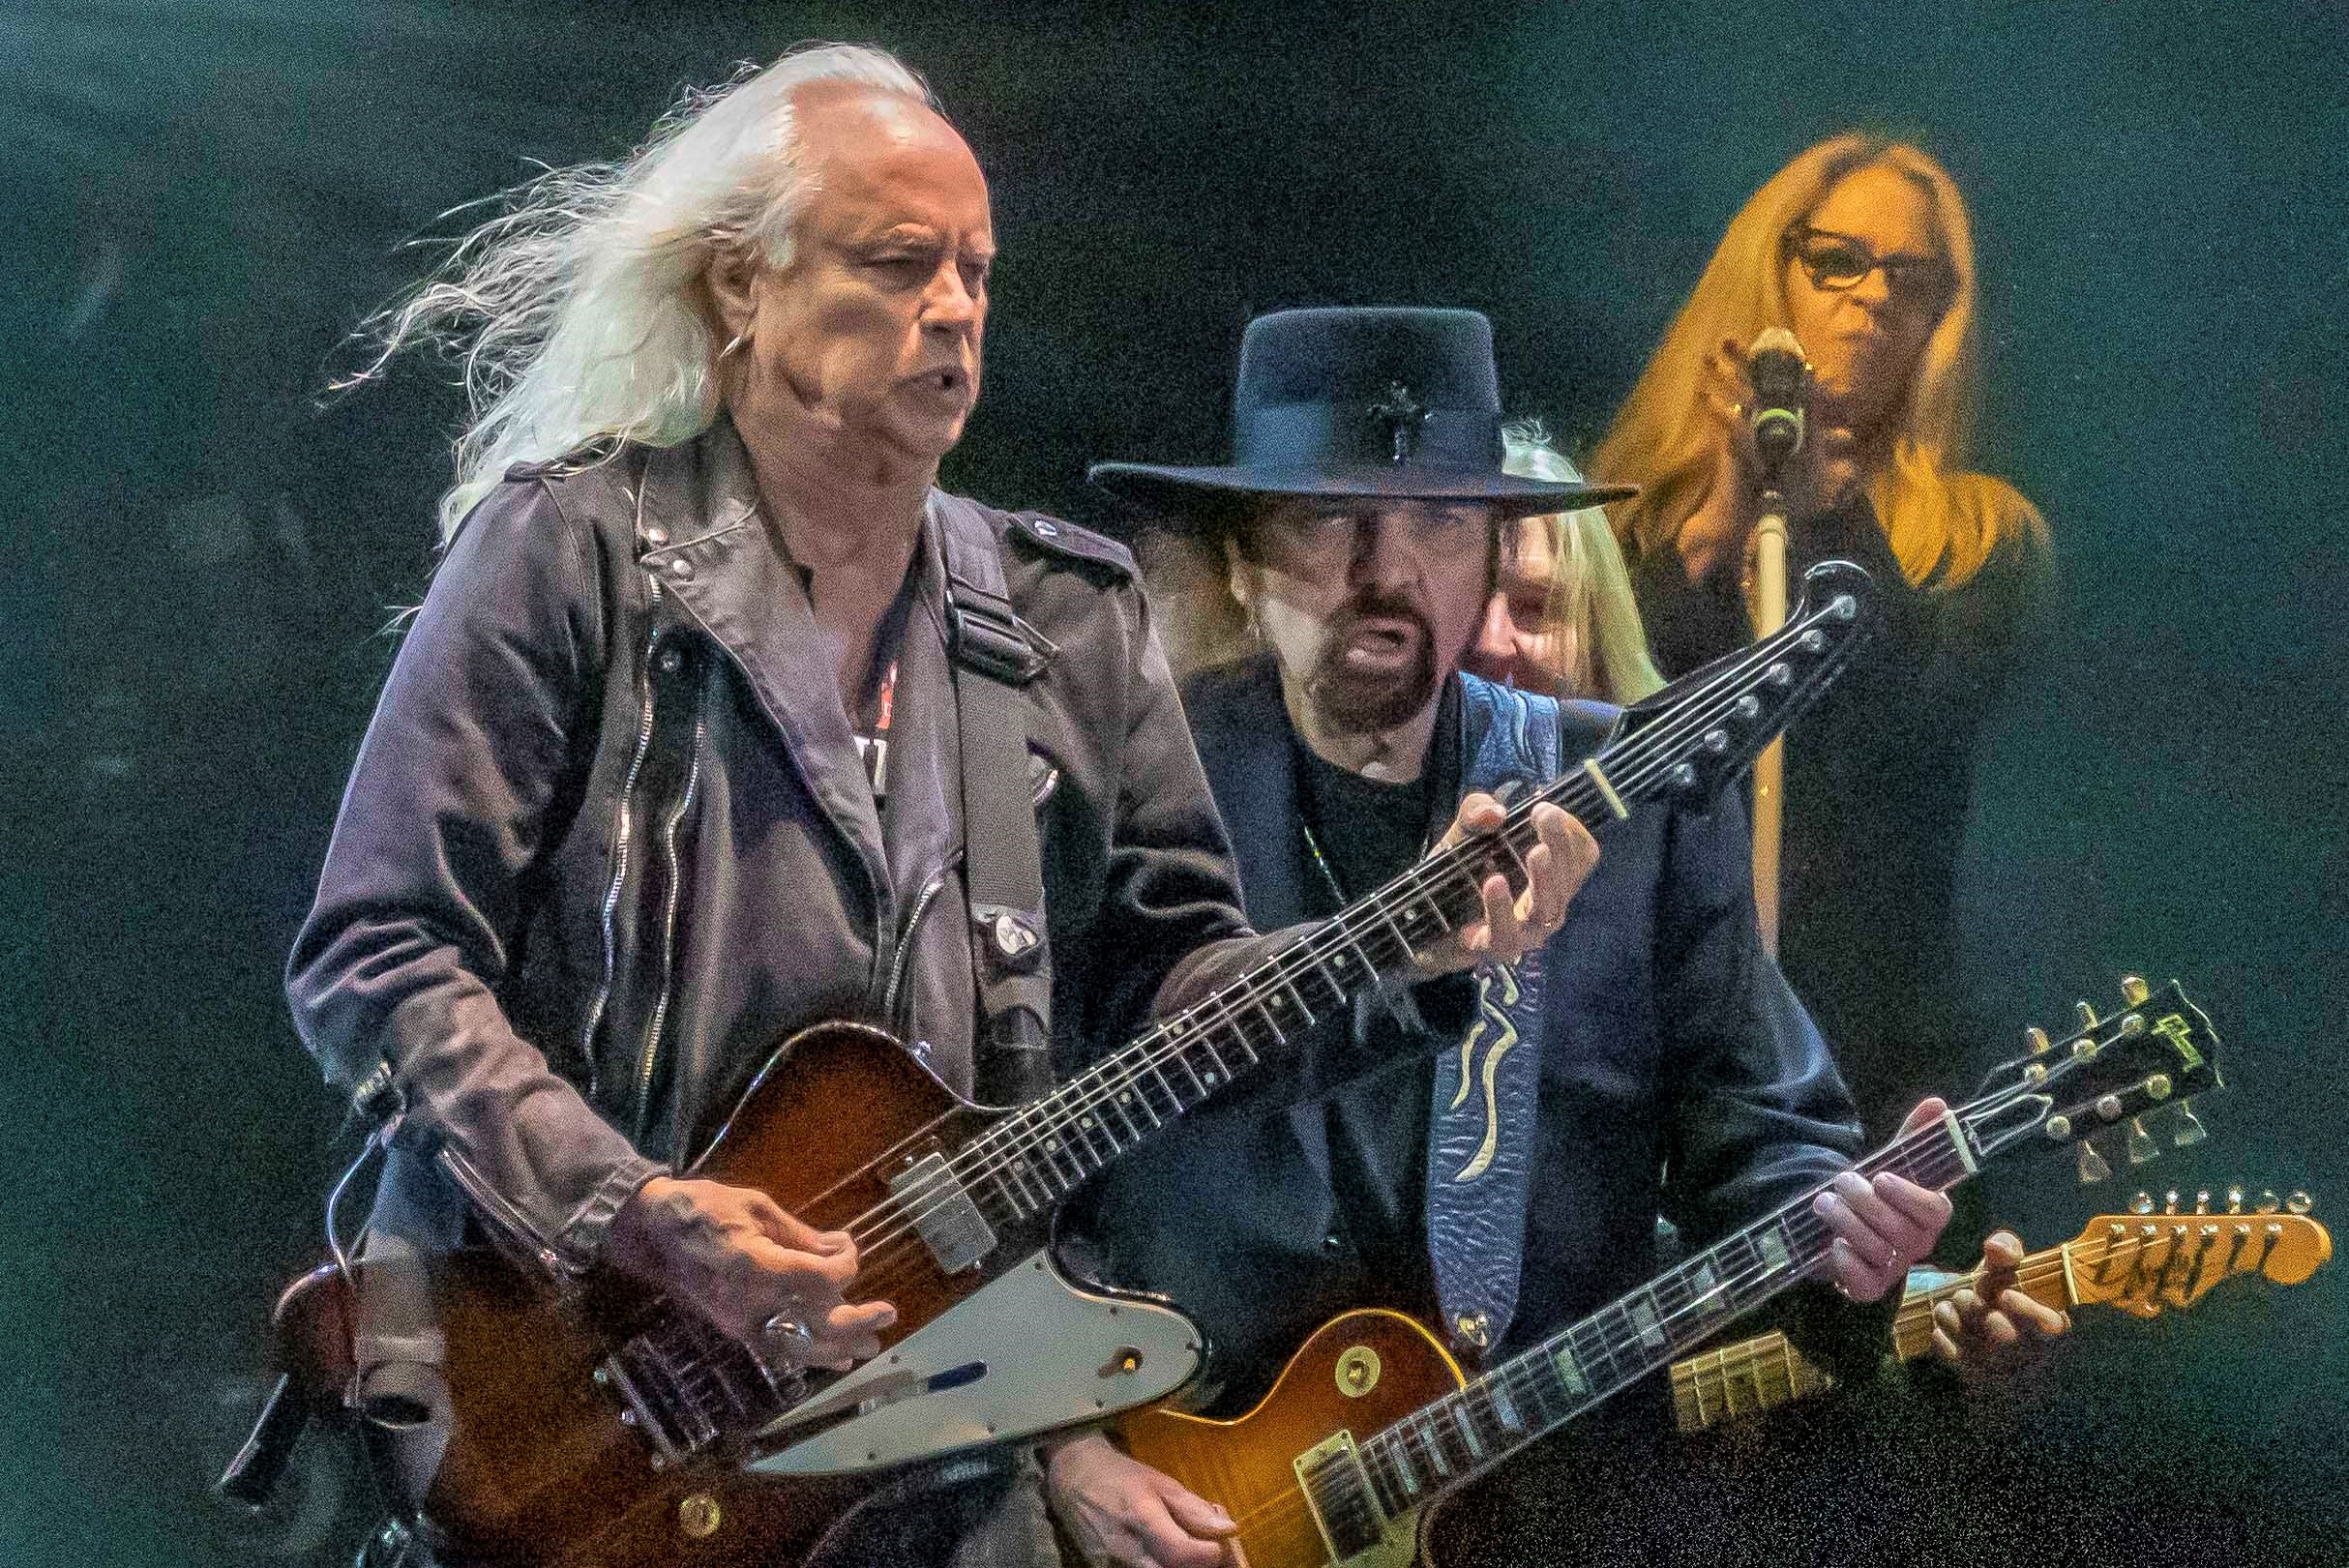 FORMER LYNYRD SKYNYRD DRUMMER ARTIMUS PYLE AND OTHERS PAY TRIBUTE TO GUITARIST GARY ROSSINGTON